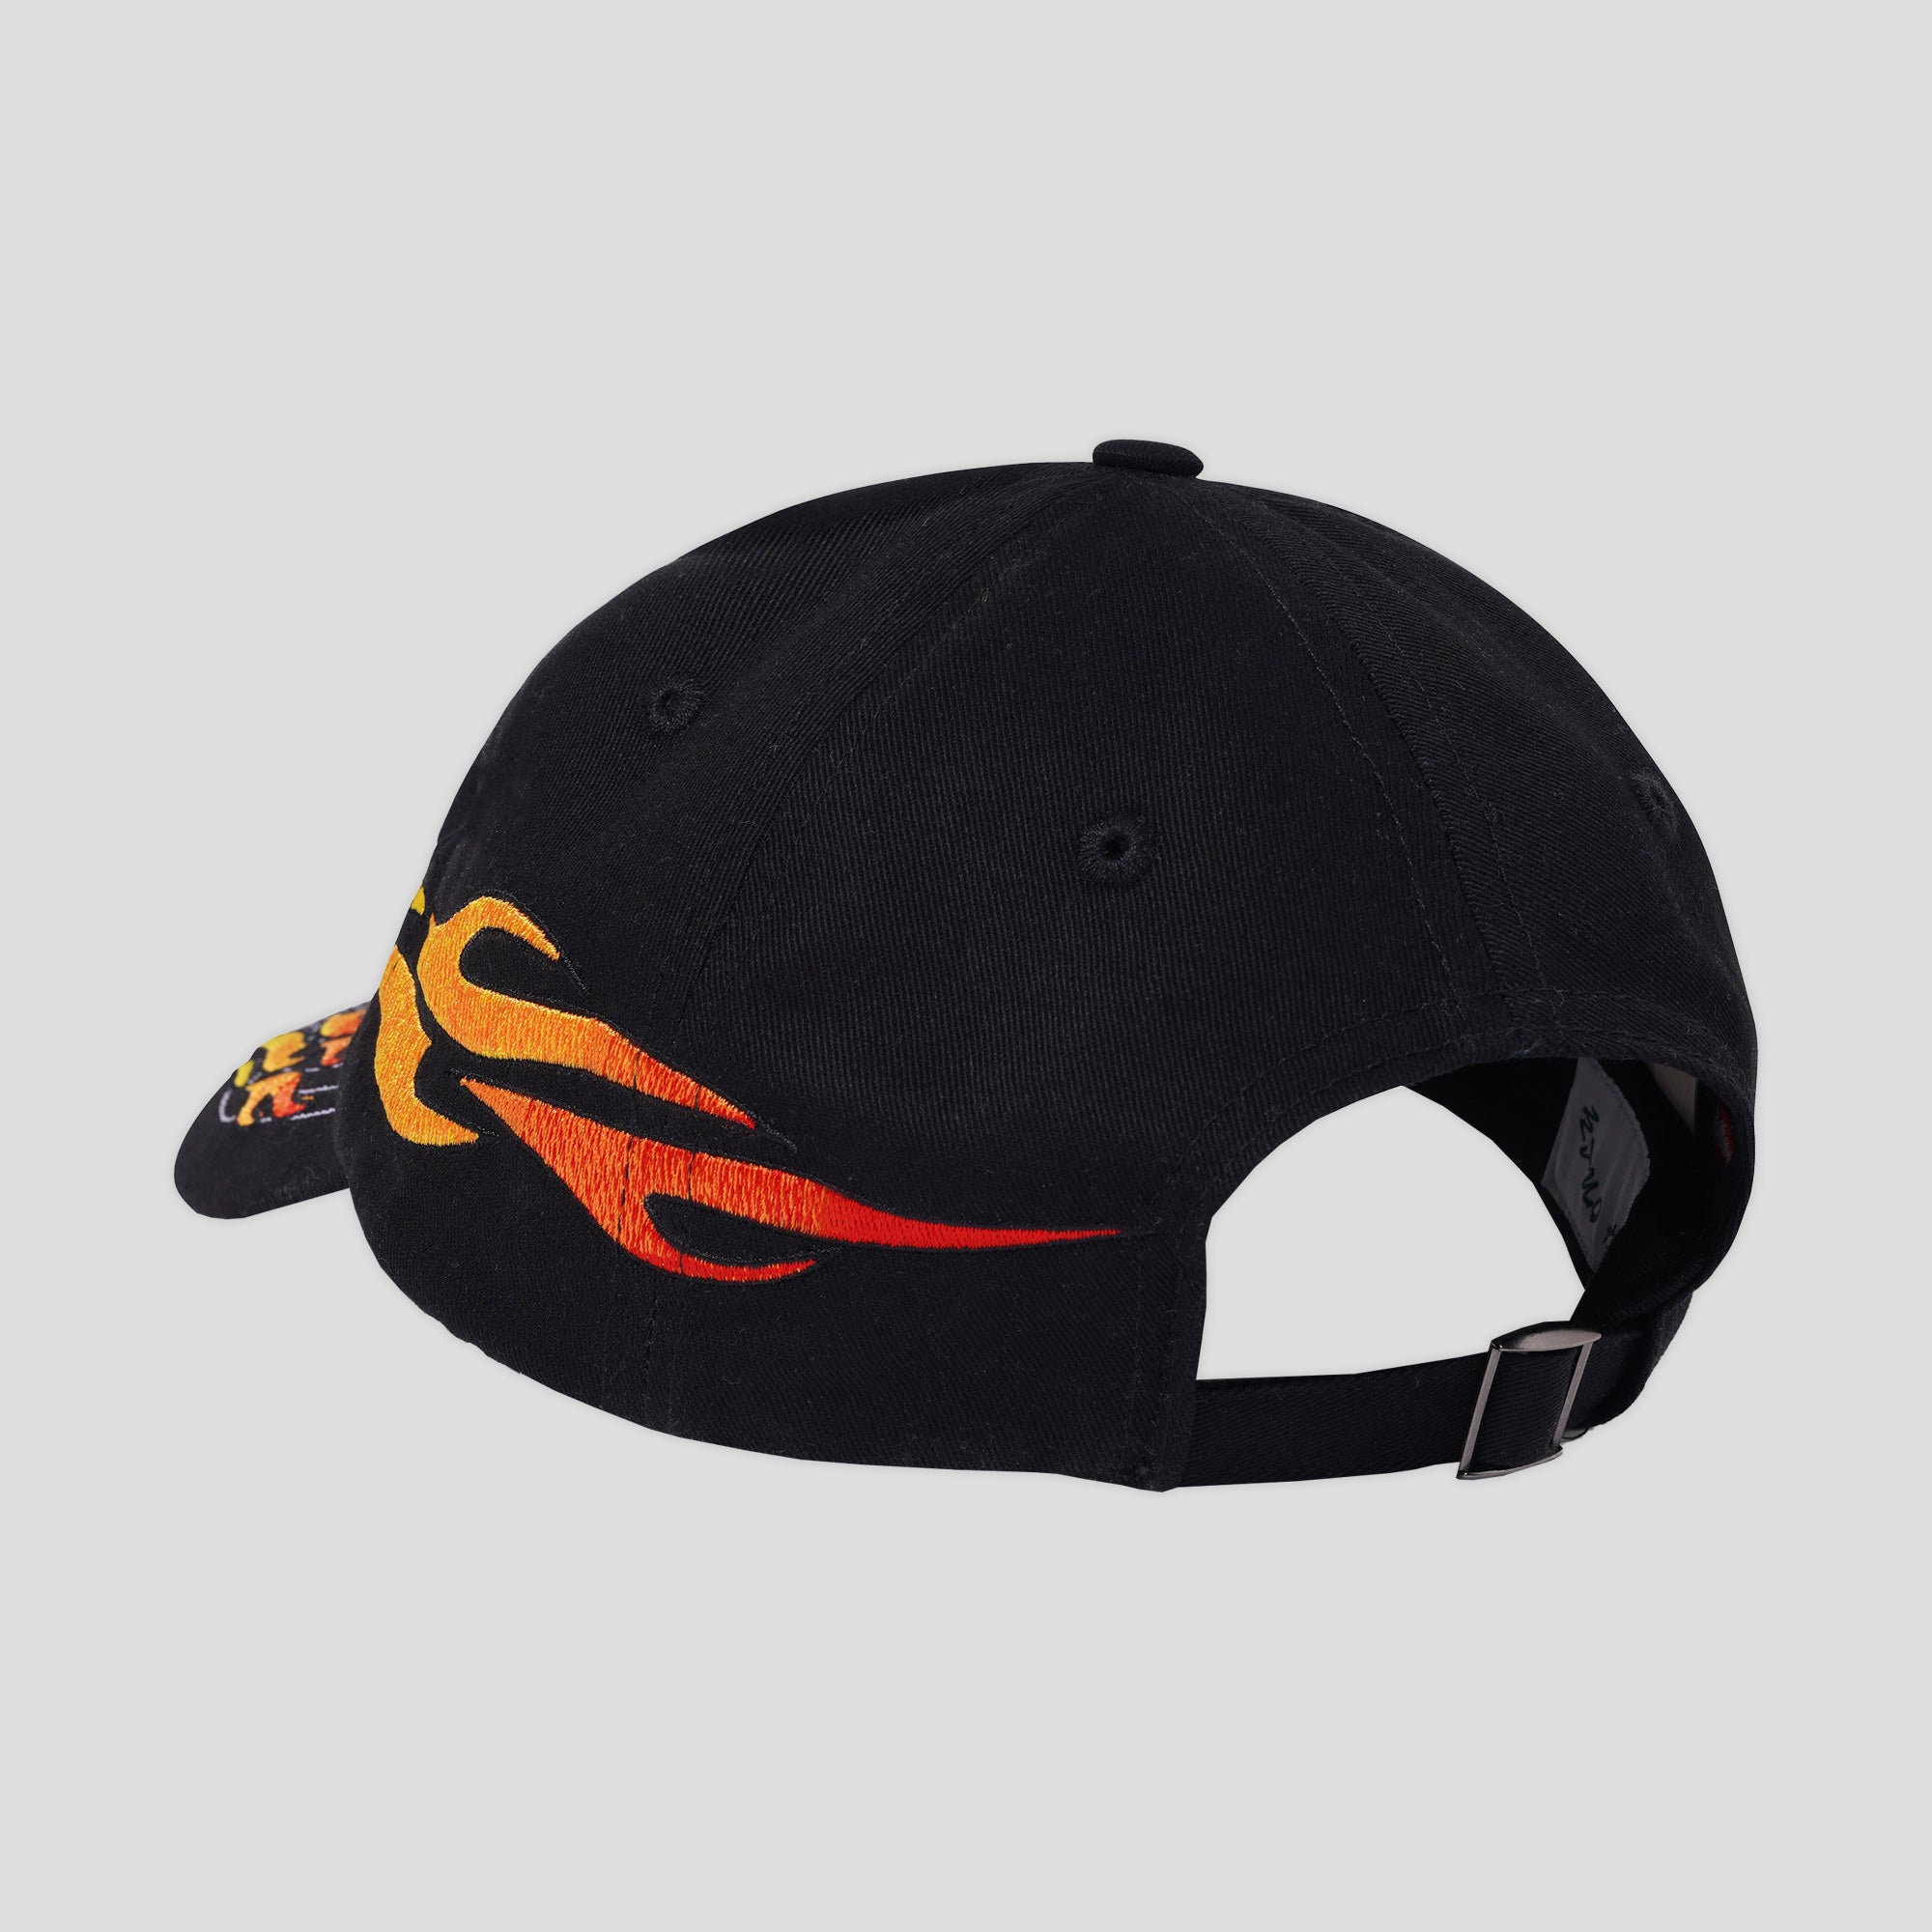 Cash Only Racing Flame Cap - Black